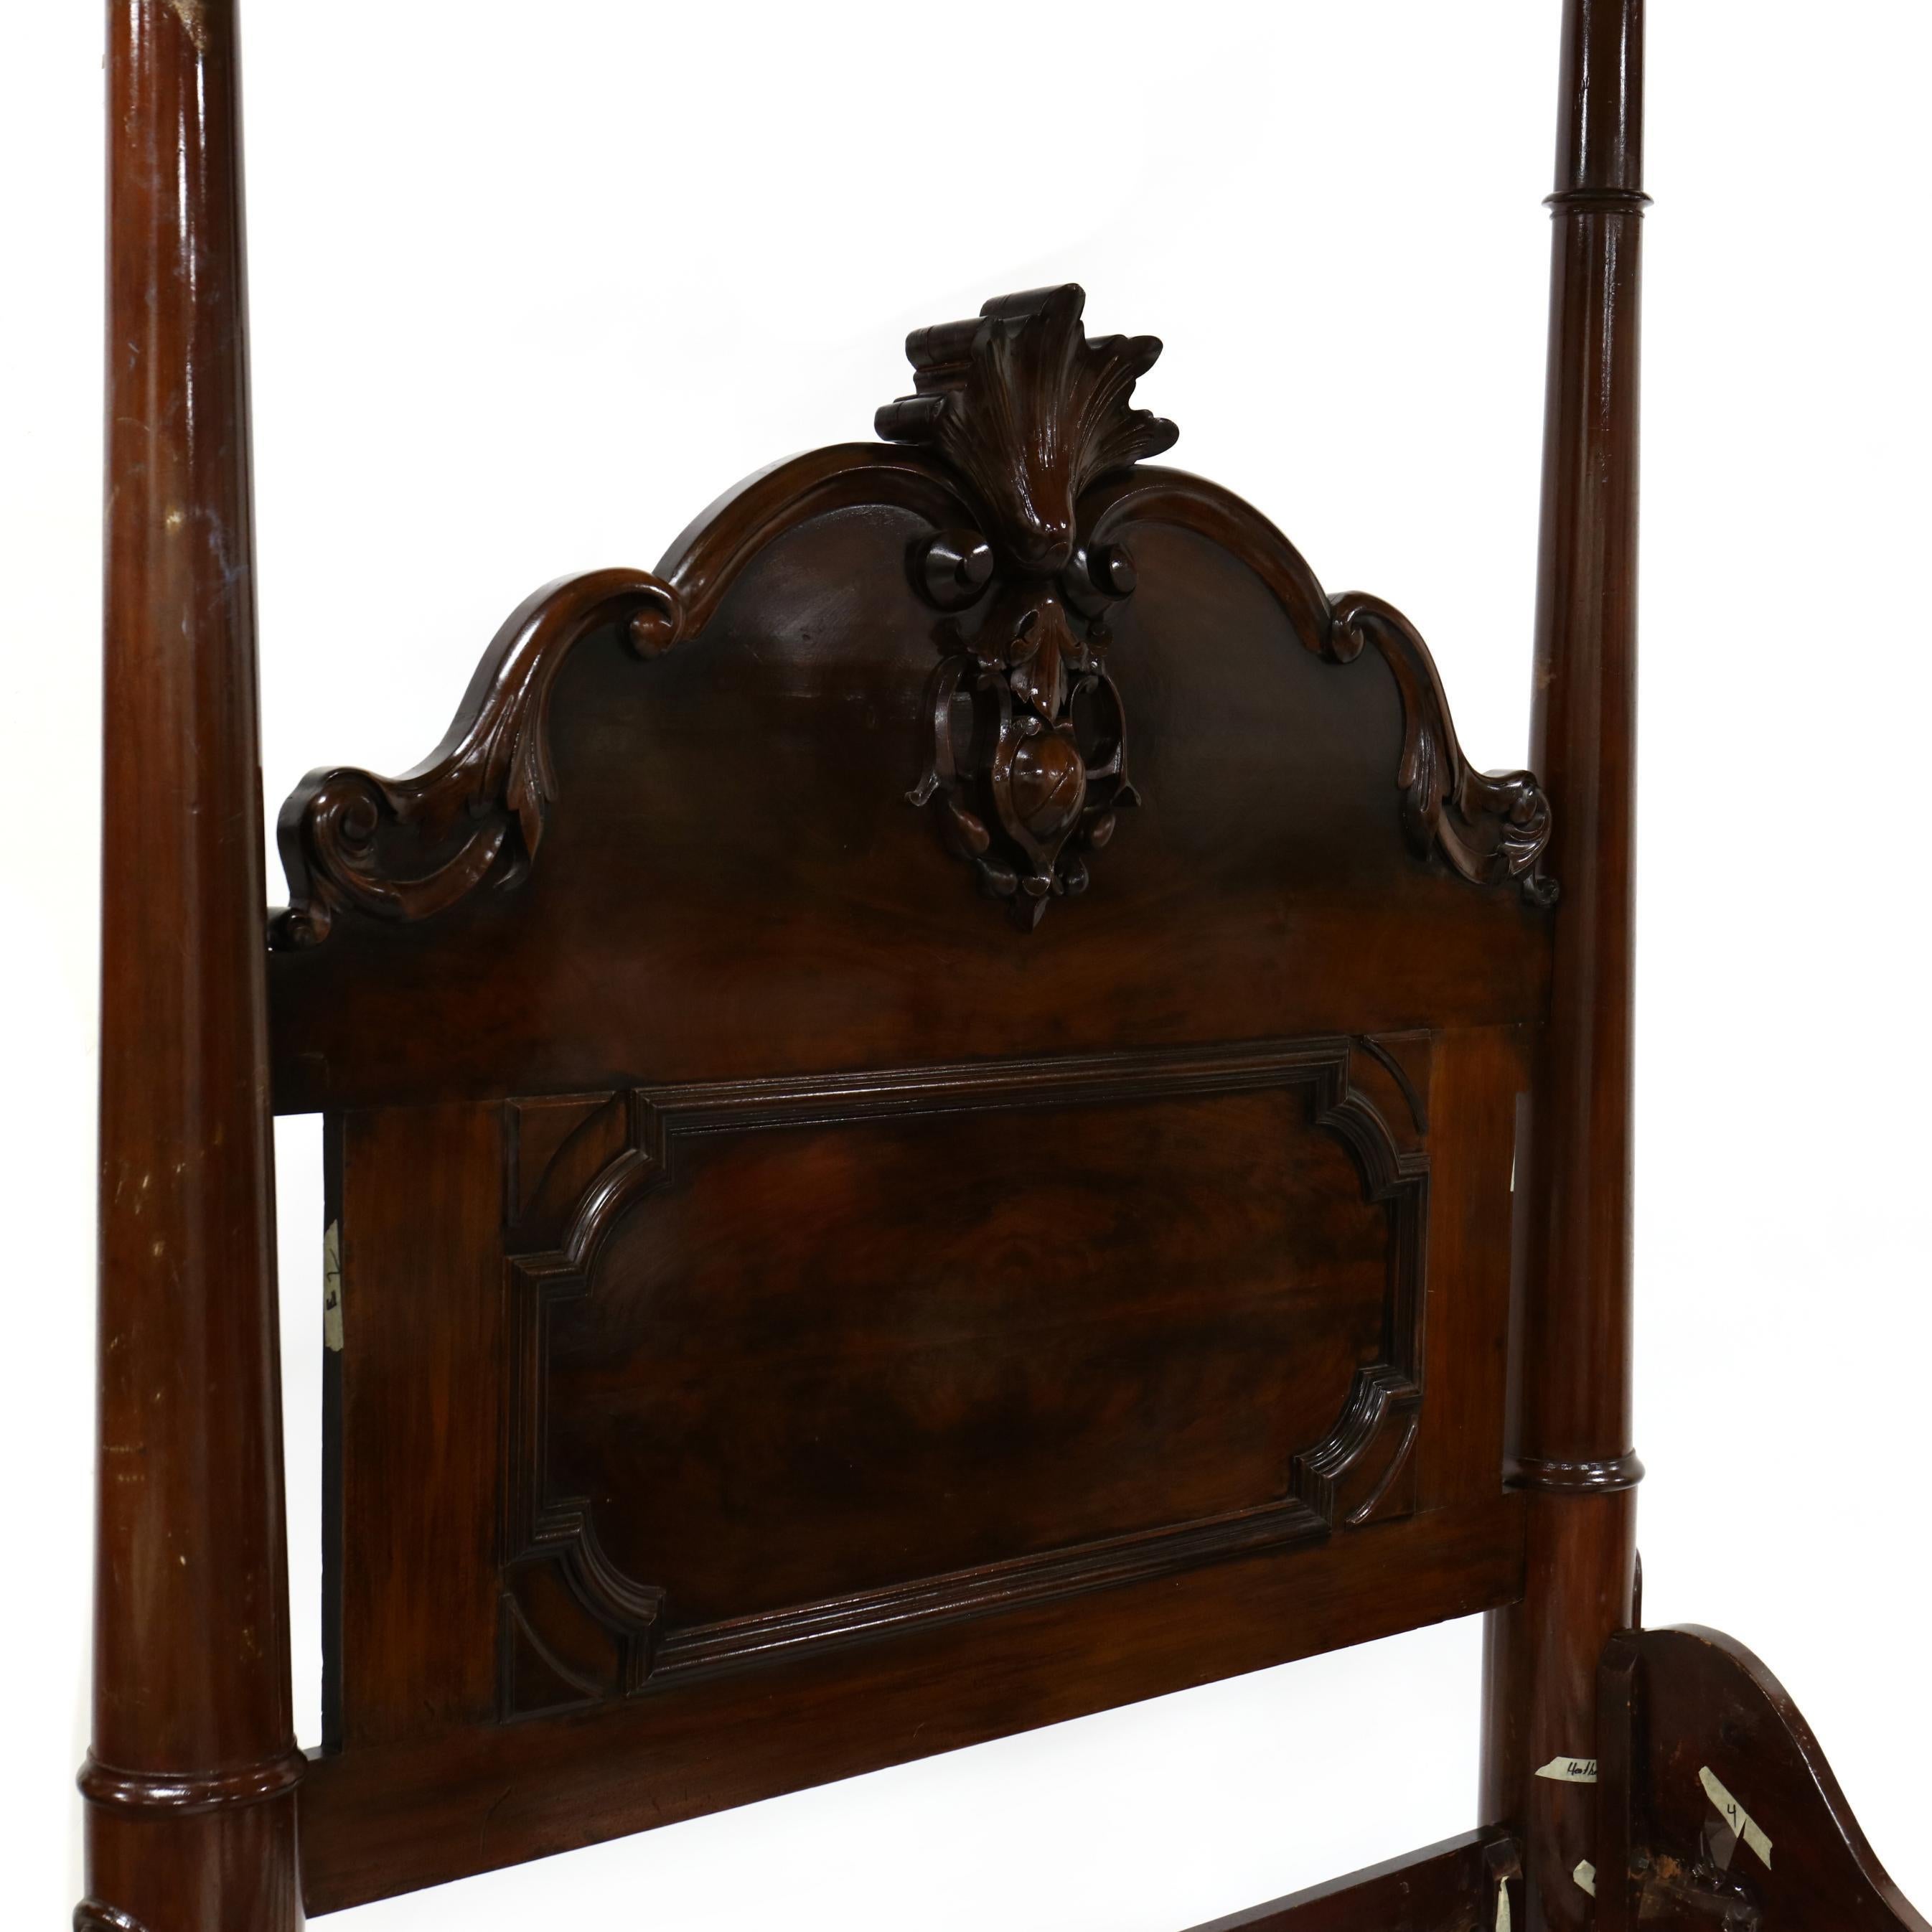 Carved Monumental American  C. LEE Full Tester, “Bed 2741 !!!” For Sale